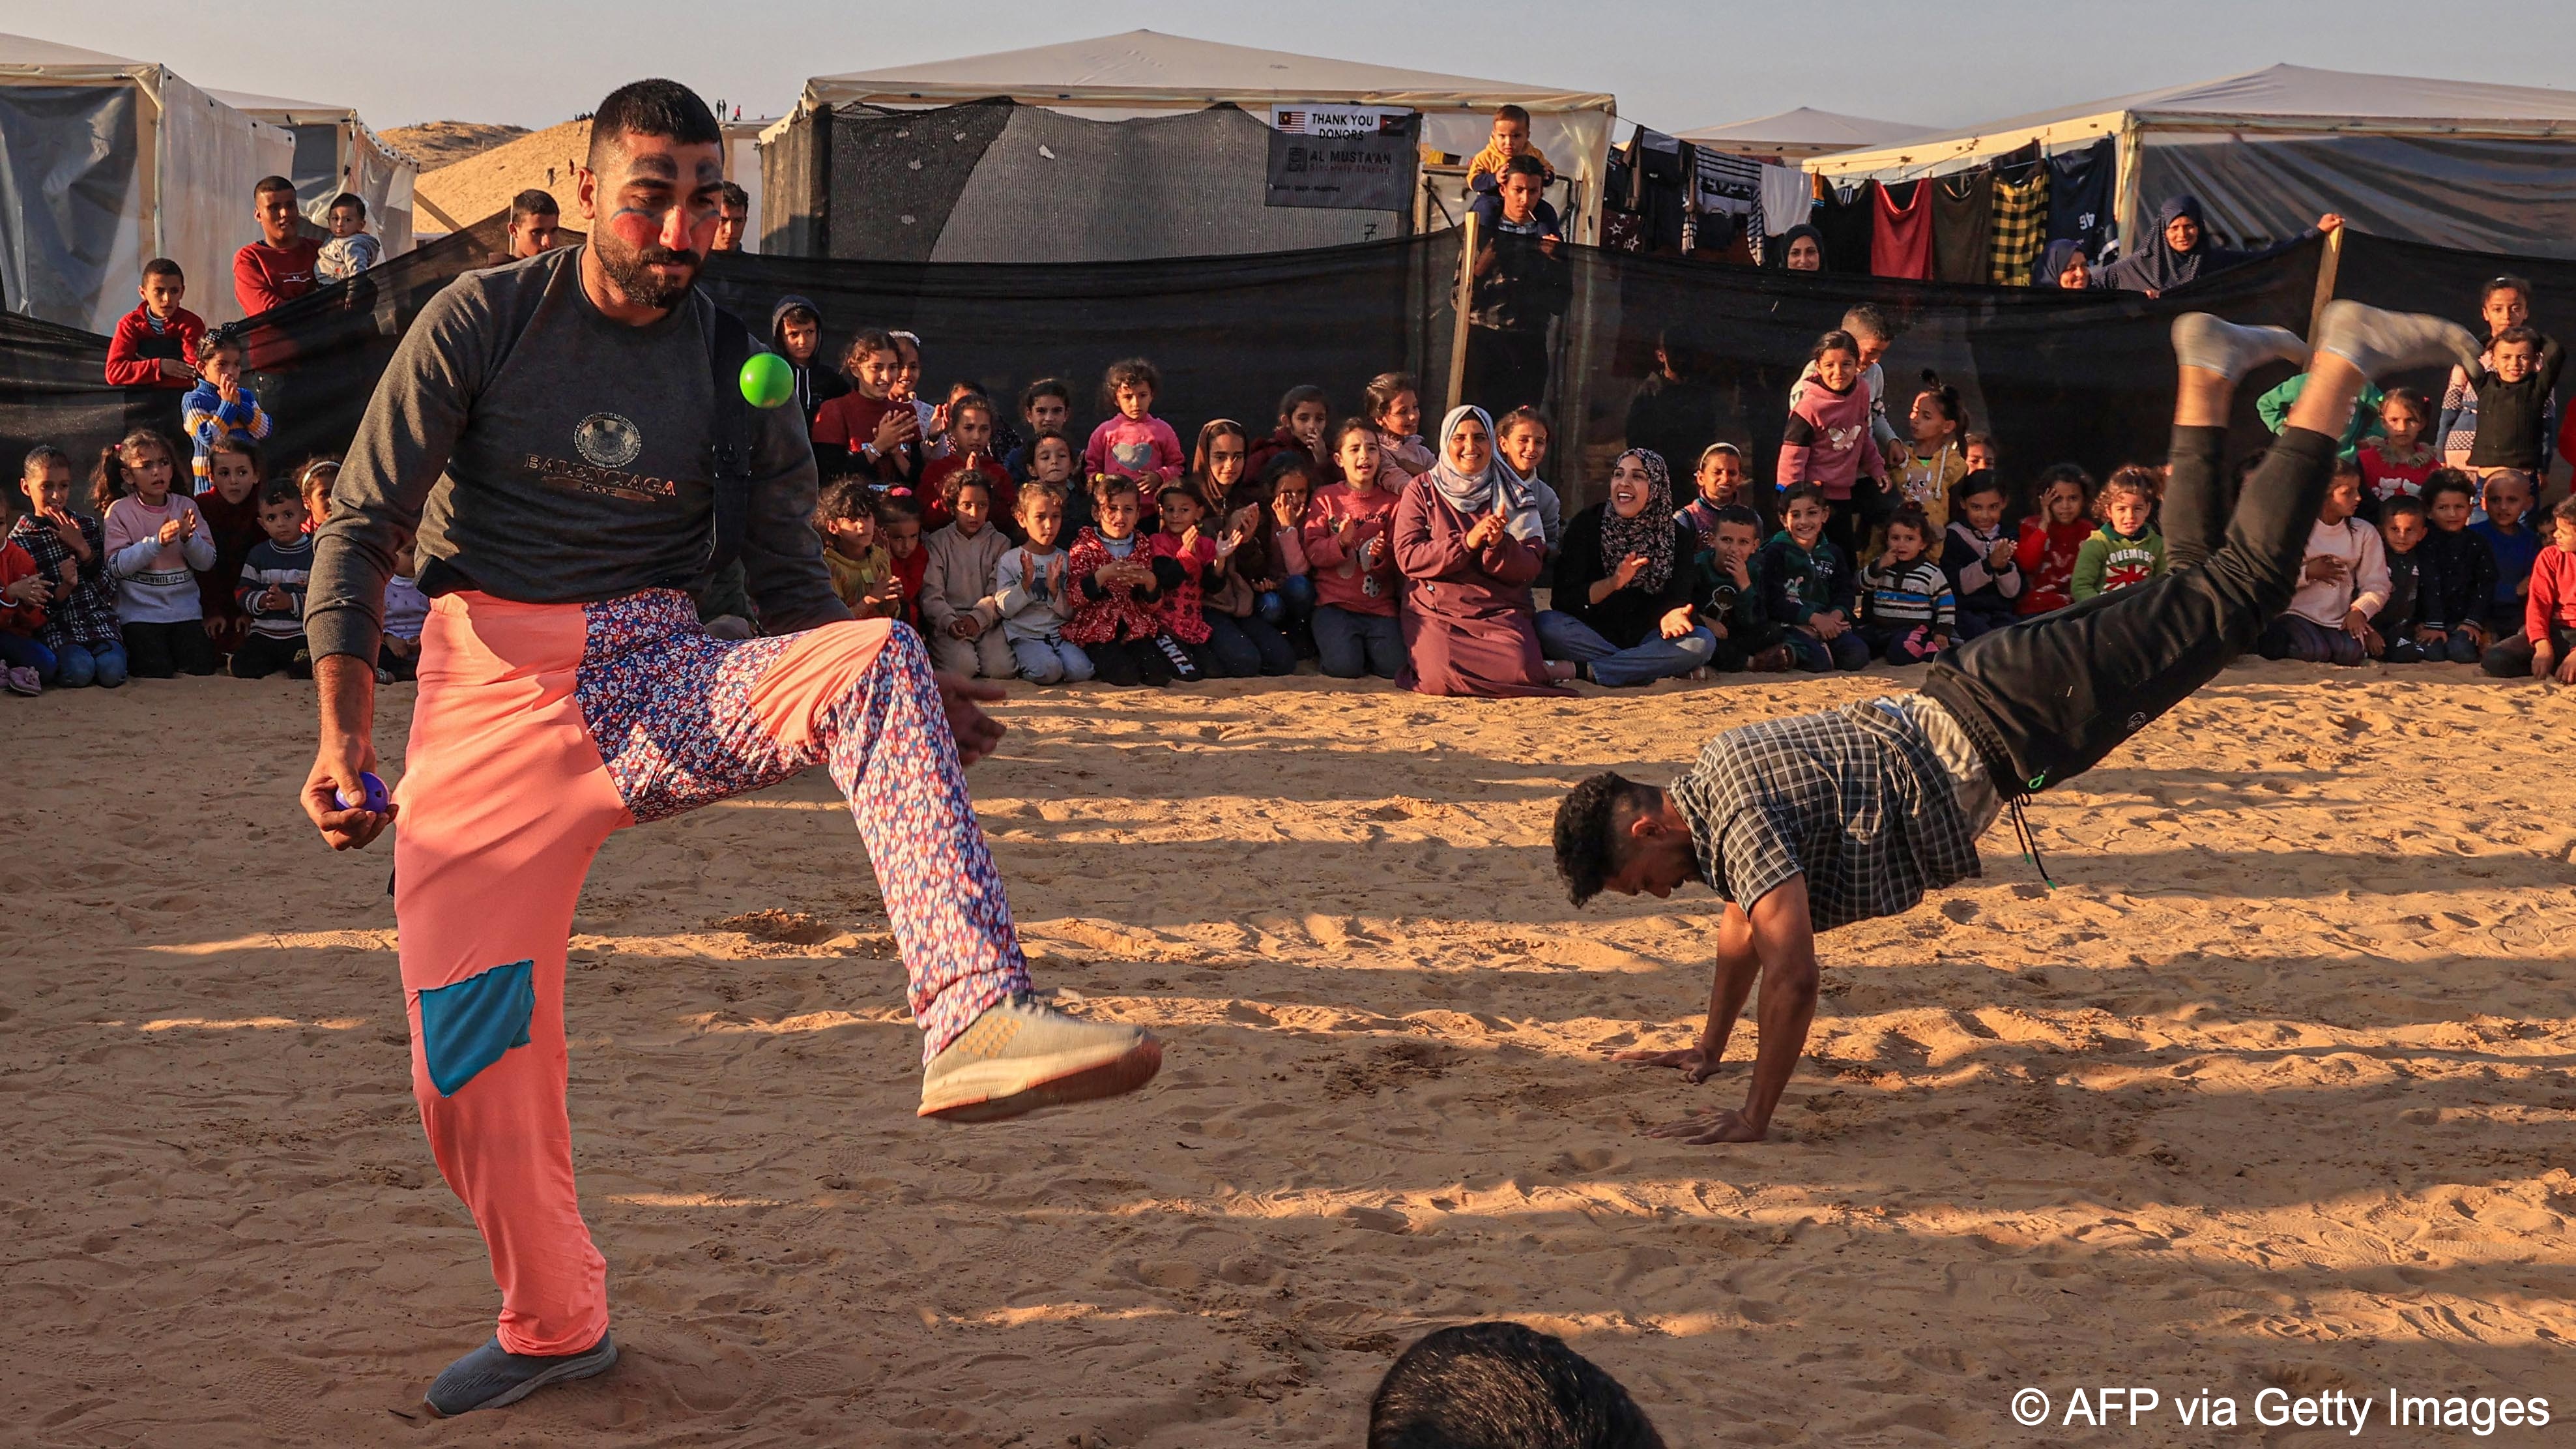 One man juggles and another man does acrobatic tricks to entertain a crowd in a camp near Rafah